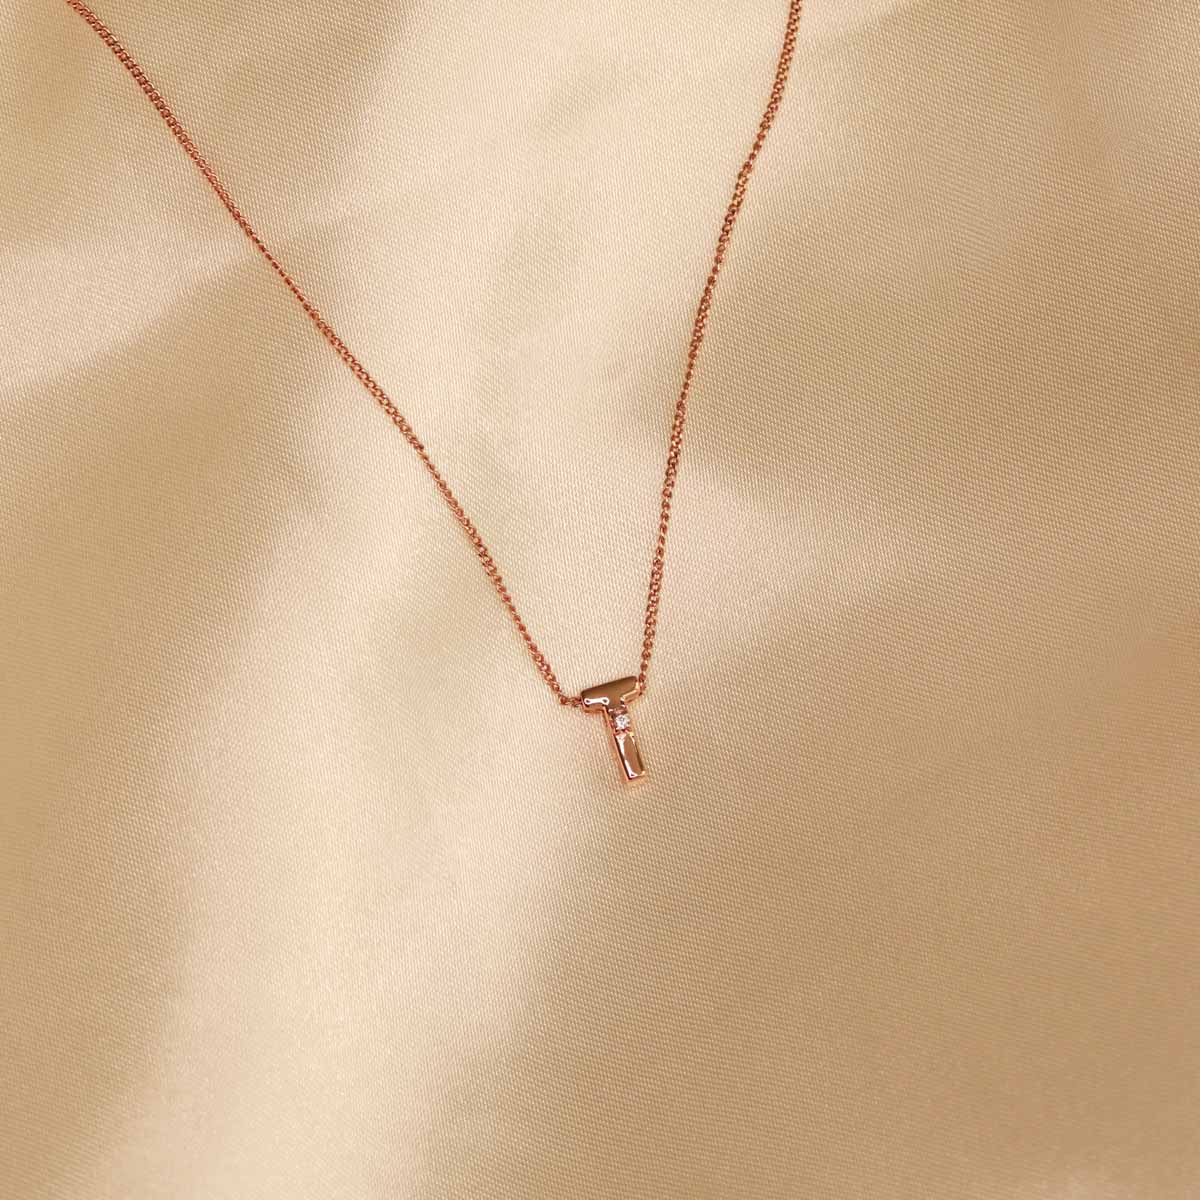 Flat lay shot of T Initial Pendant Necklace in Rose Gold